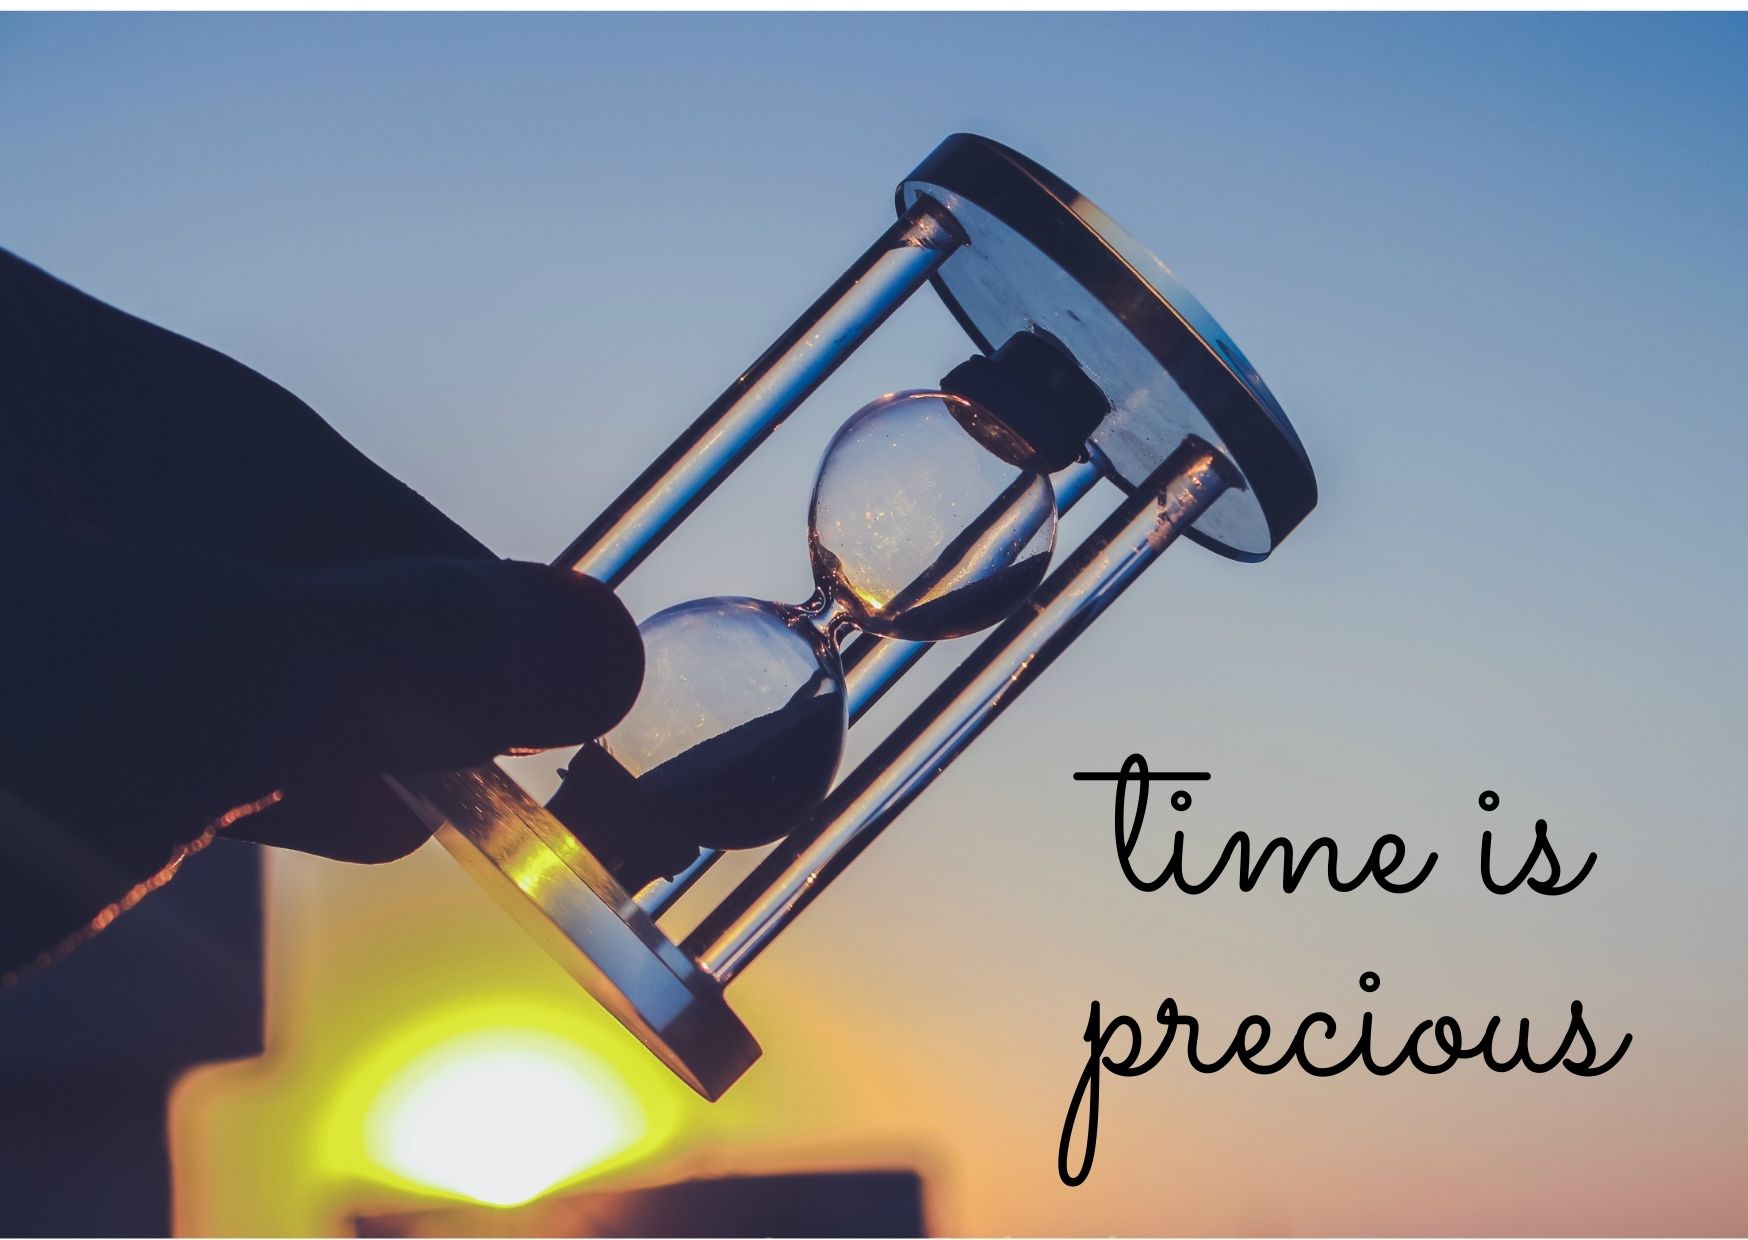 hourglass set to sunset background with 'time is precious' written on image